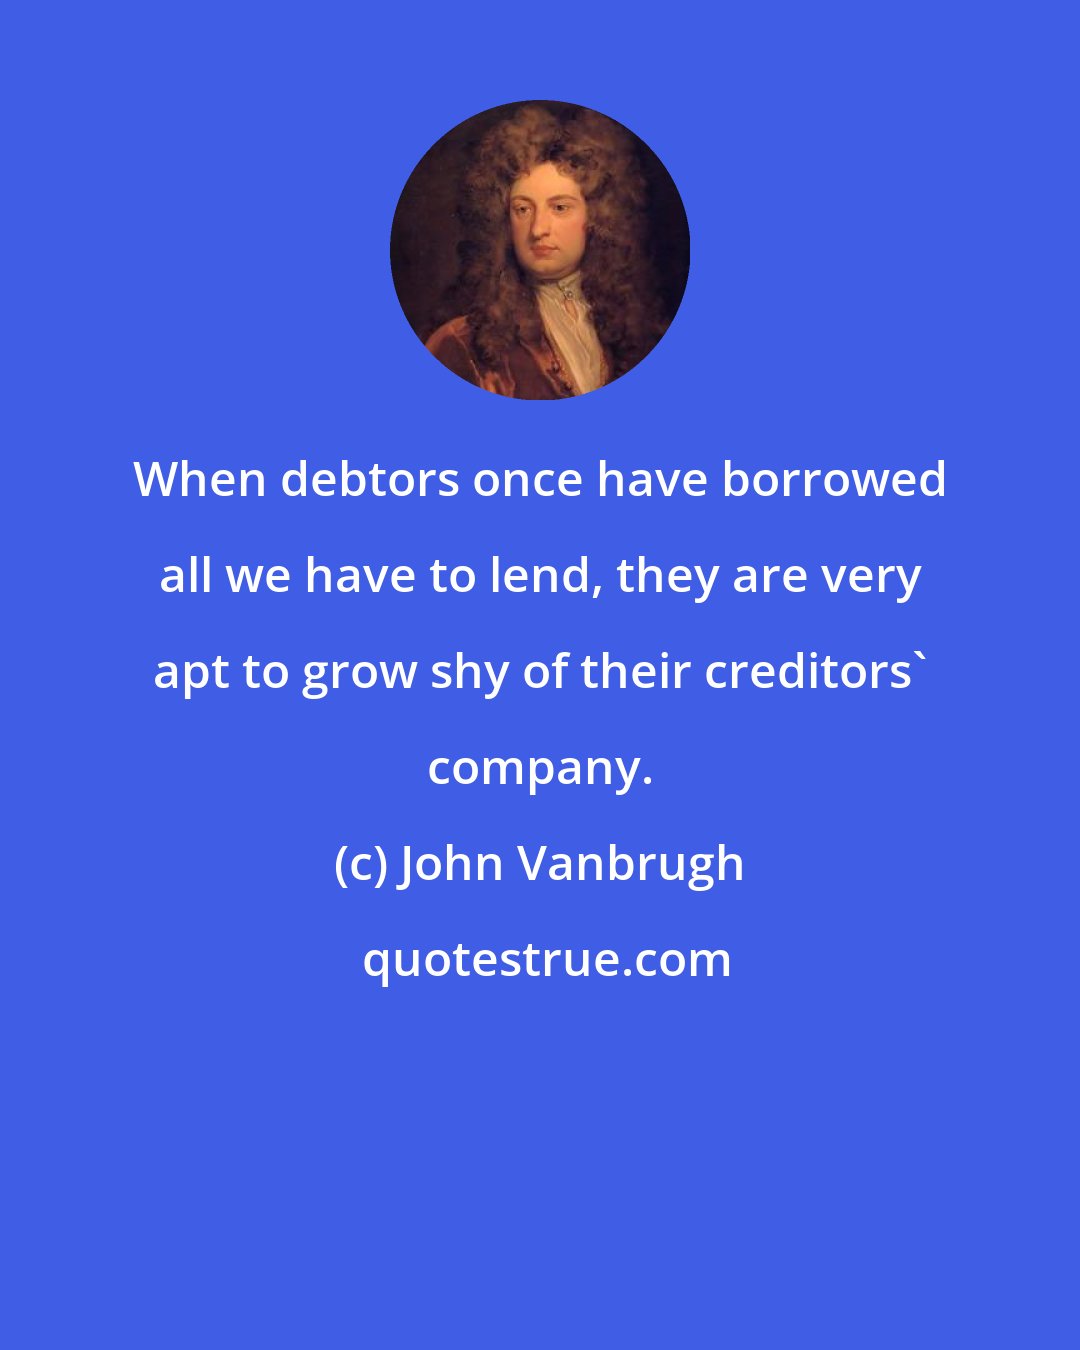 John Vanbrugh: When debtors once have borrowed all we have to lend, they are very apt to grow shy of their creditors' company.